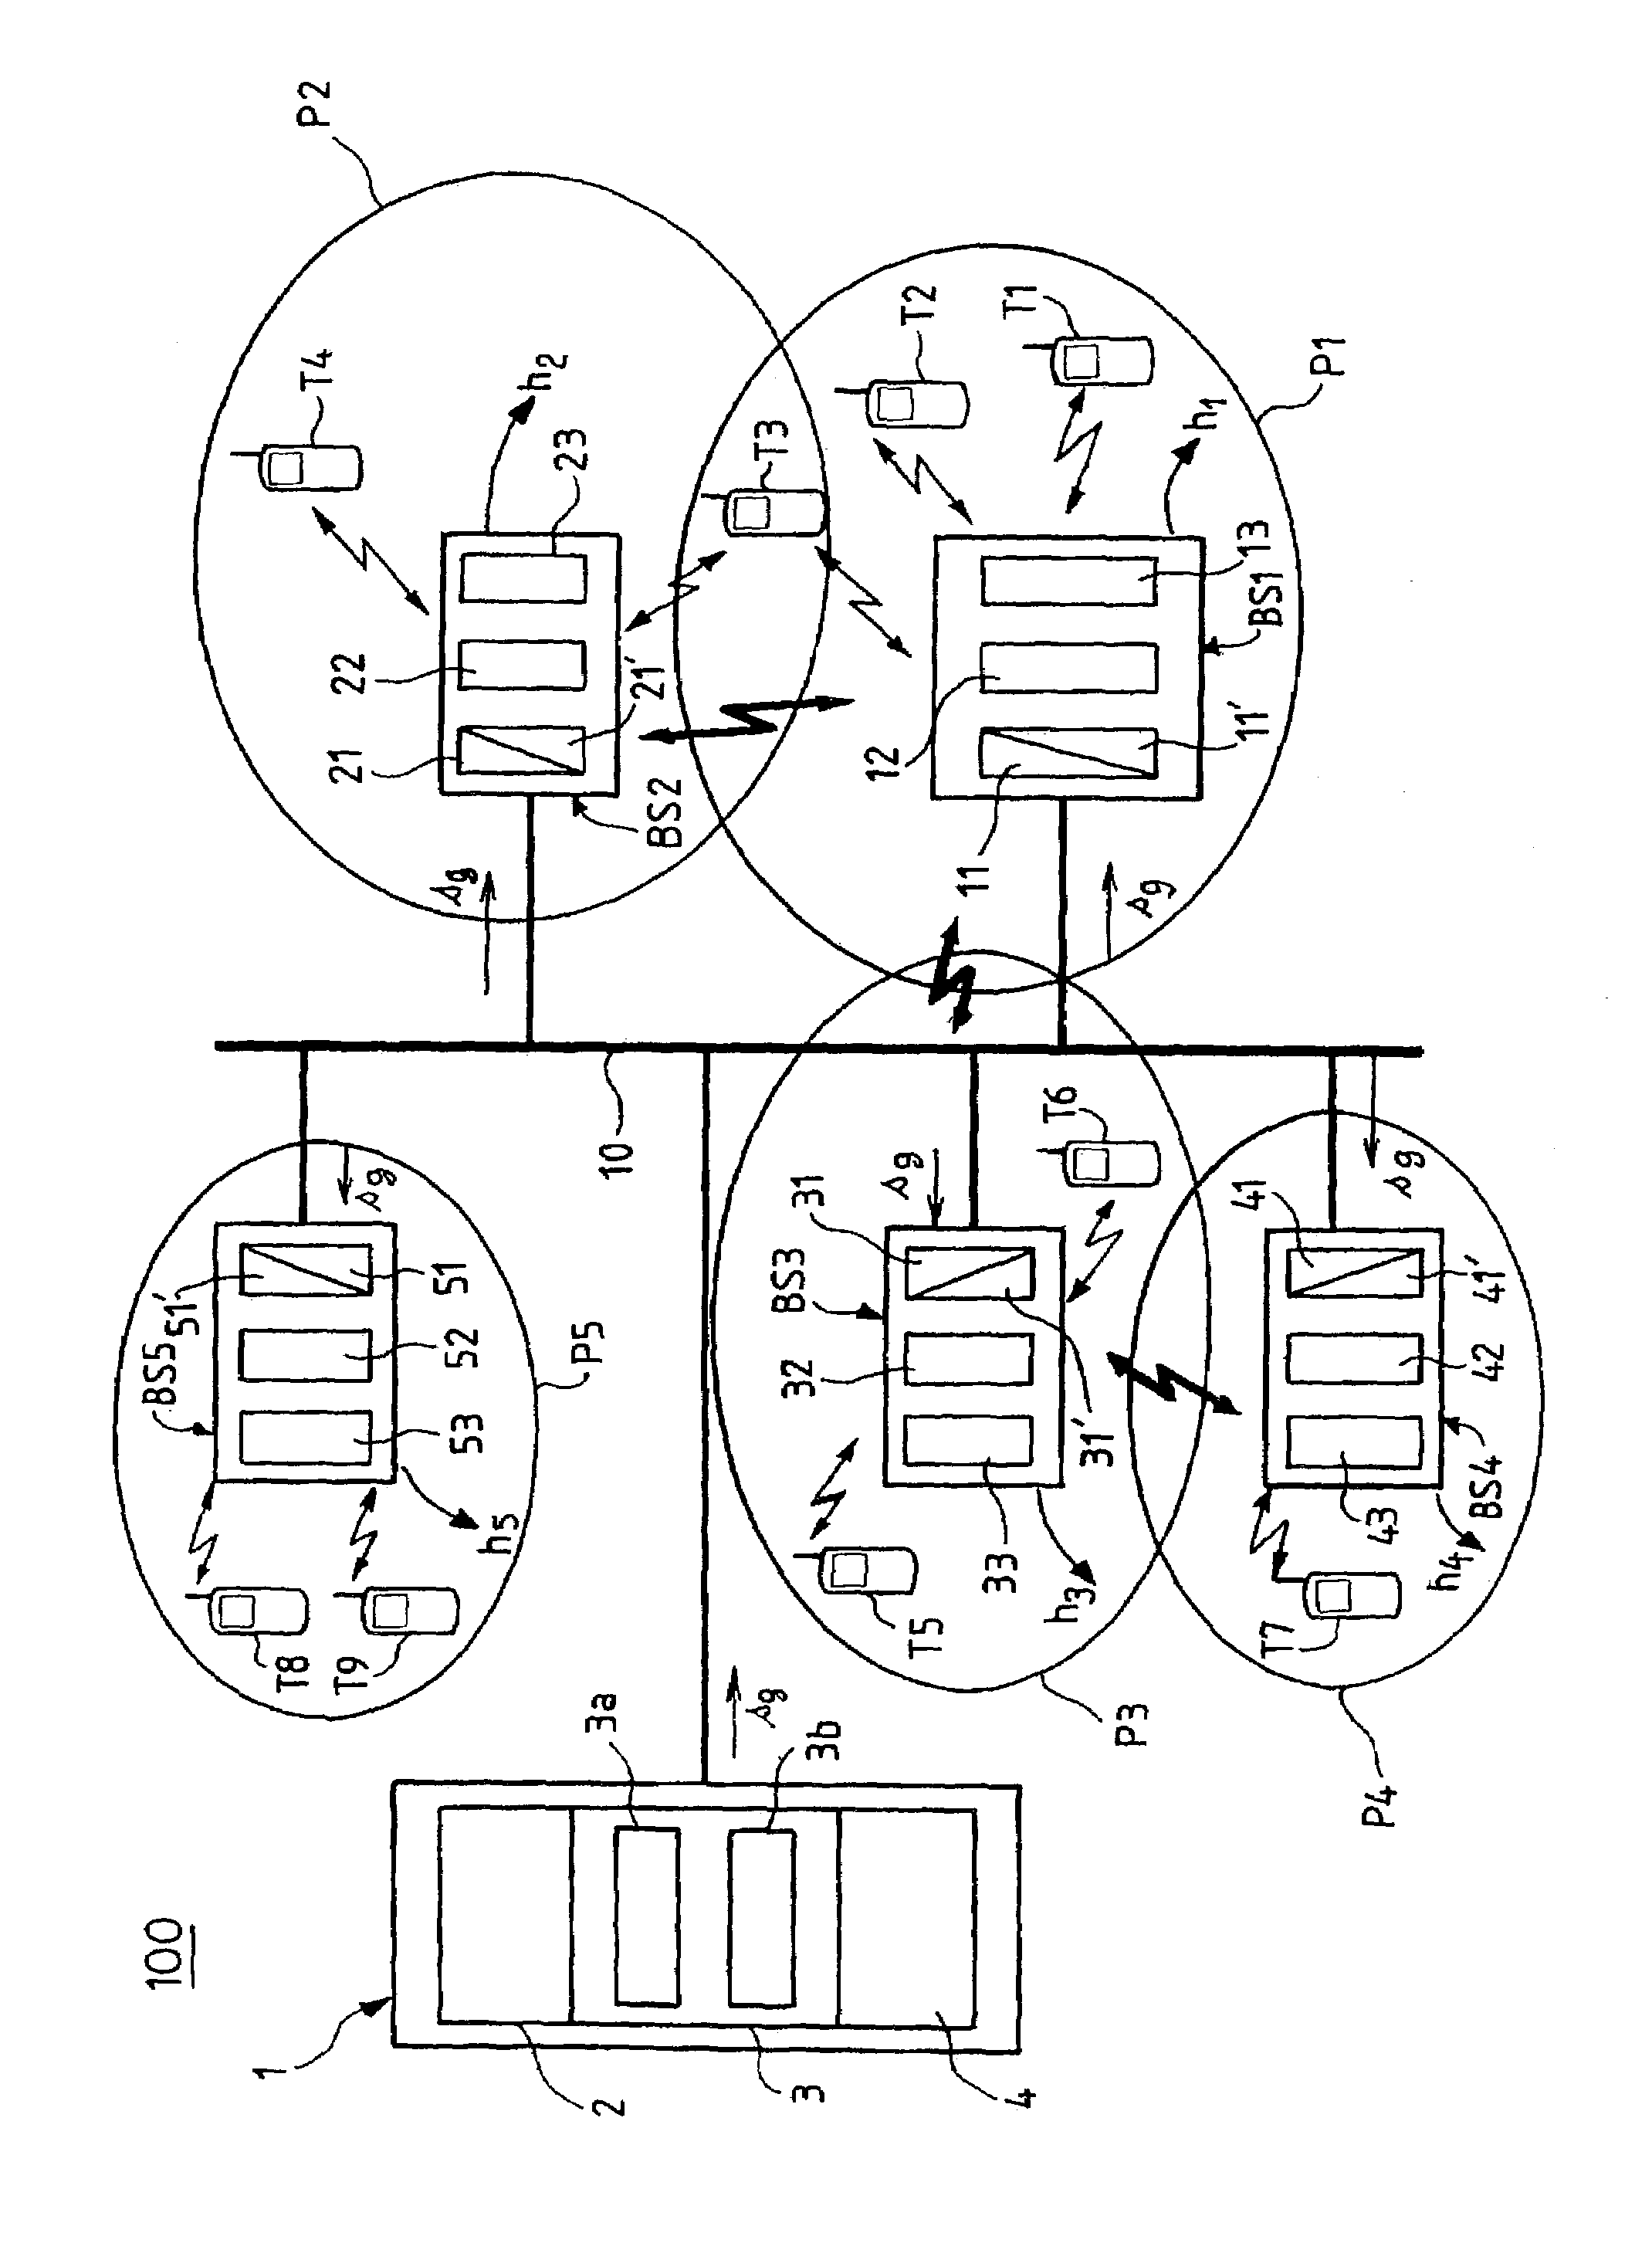 Method of synchronizing base stations interconnected by a local area network